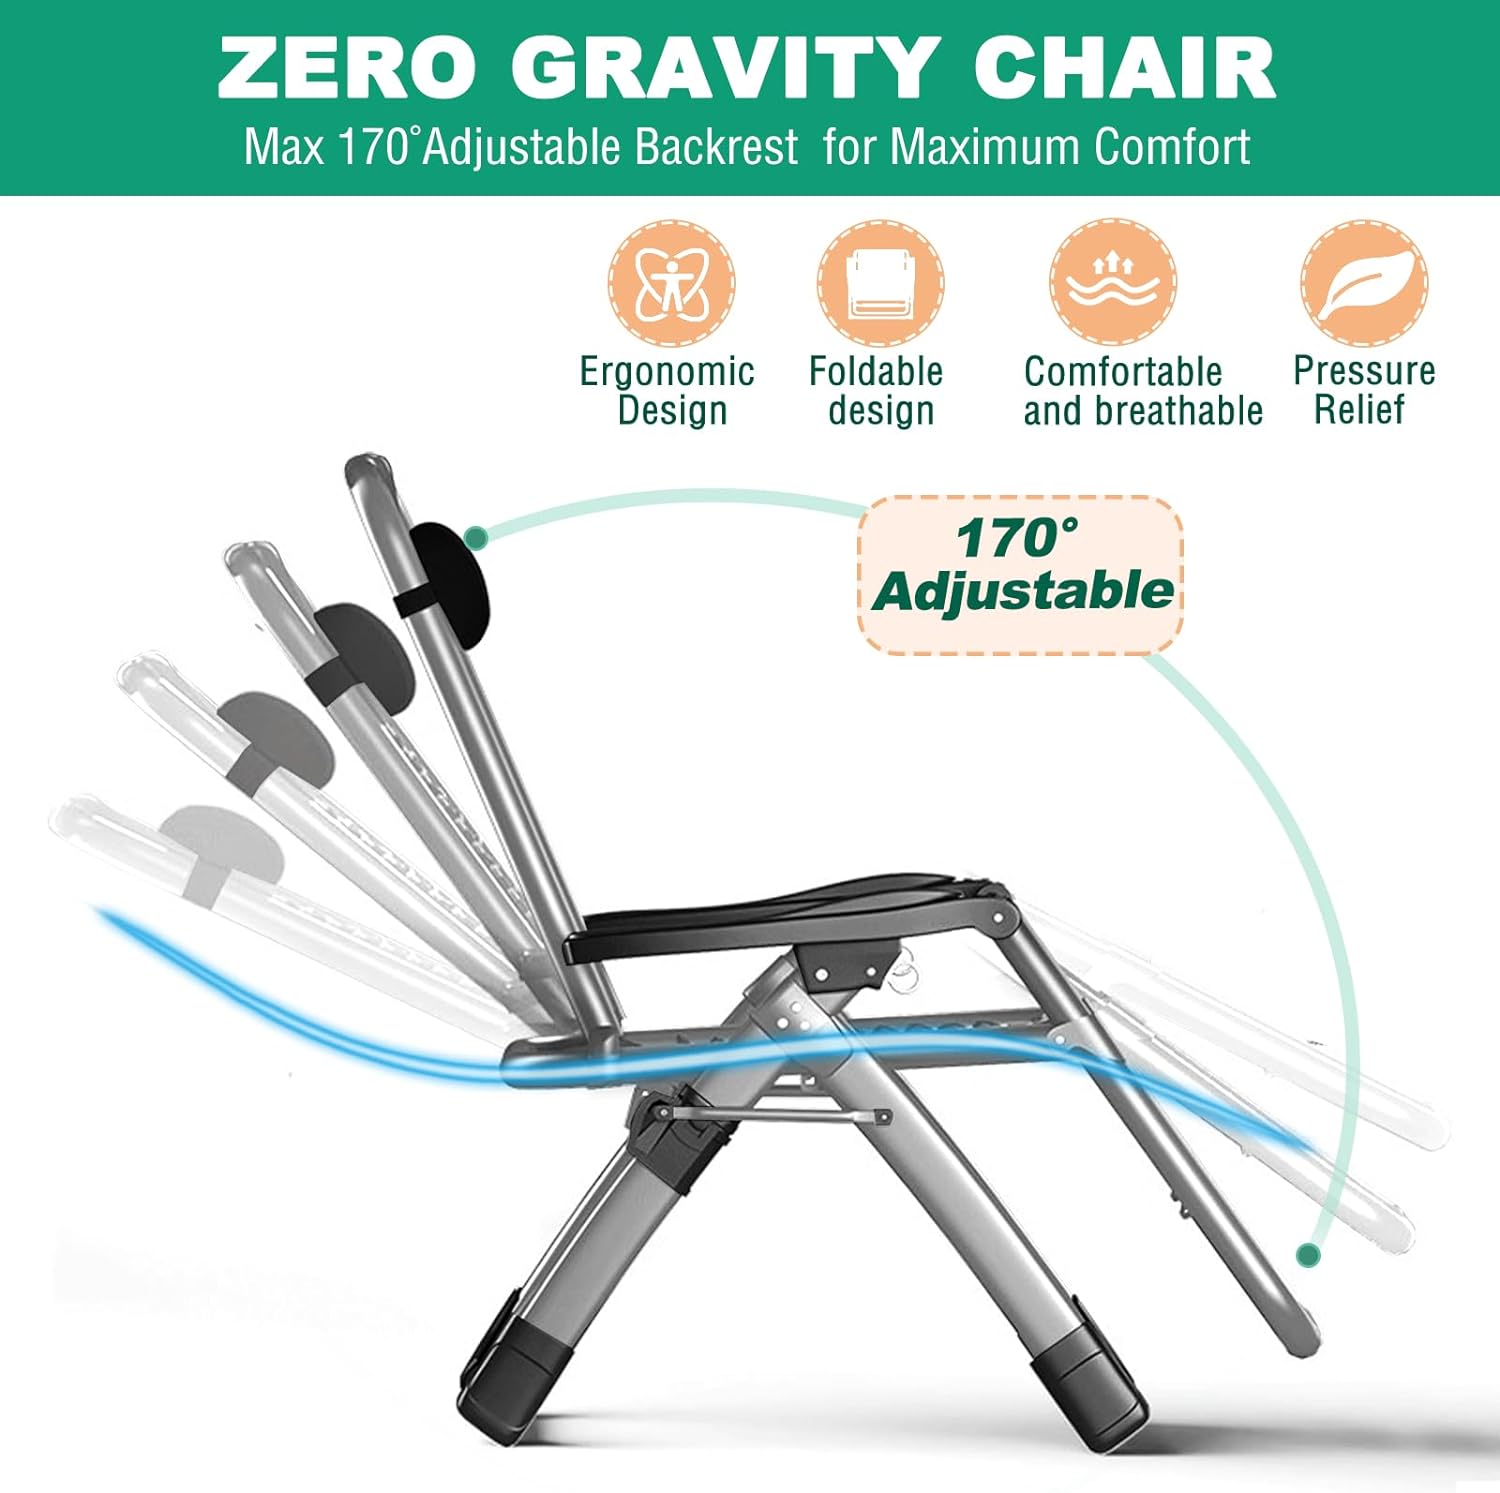 Slsy Zero Gravity Chair 2 Pack, Oversized XL Lounge Chair with Removable Pad & Cup Holder for Indoor and Outdoor, Folding Reclining Chair Set of 2 for Adults - image 2 of 7